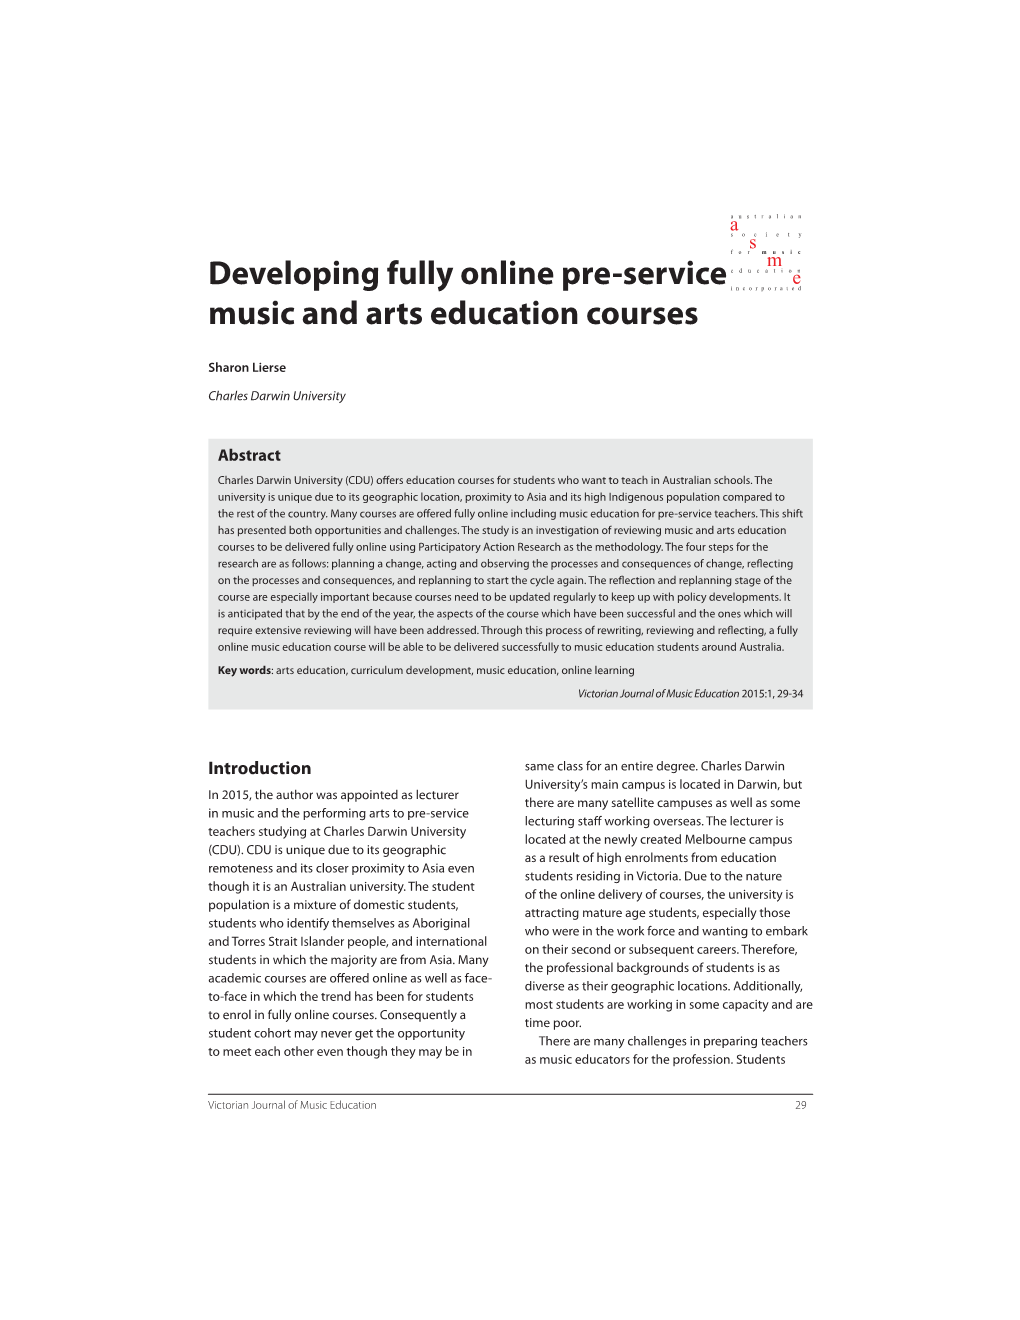 Developing Fully Online Pre-Service Music and Arts Education Courses